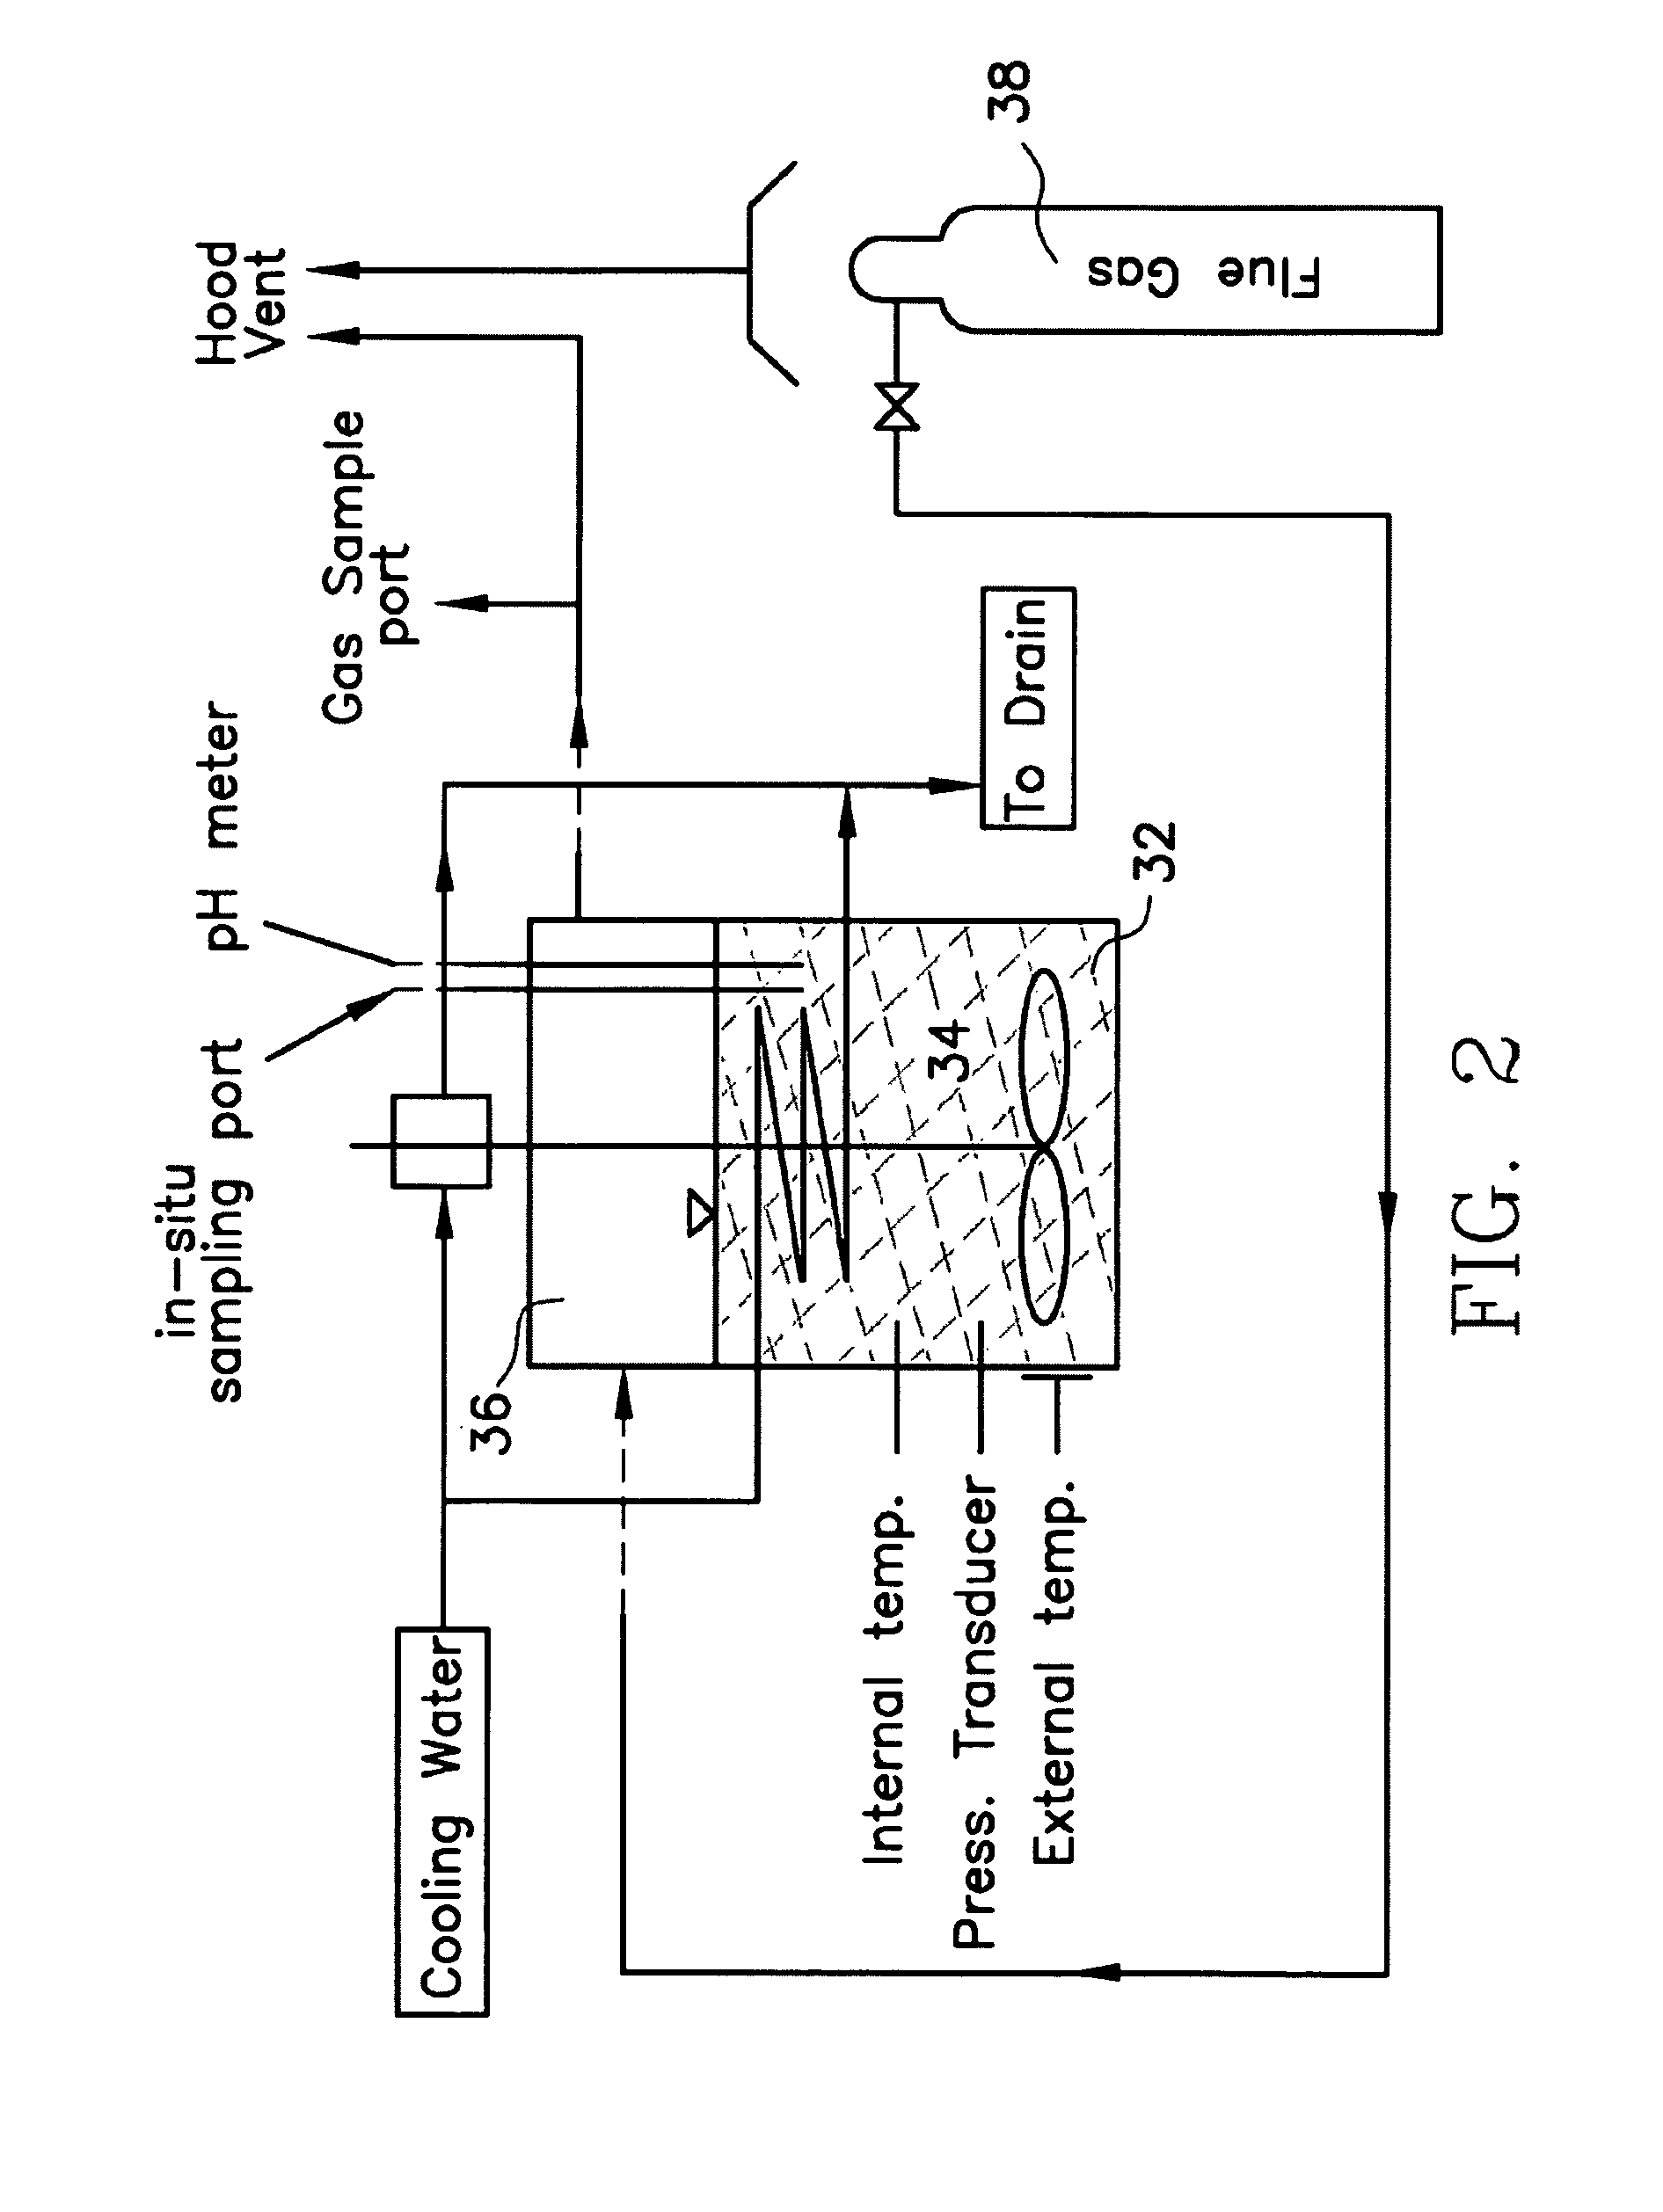 Method for sequestering CO2 and SO2 utilizing a plurality of waste streams